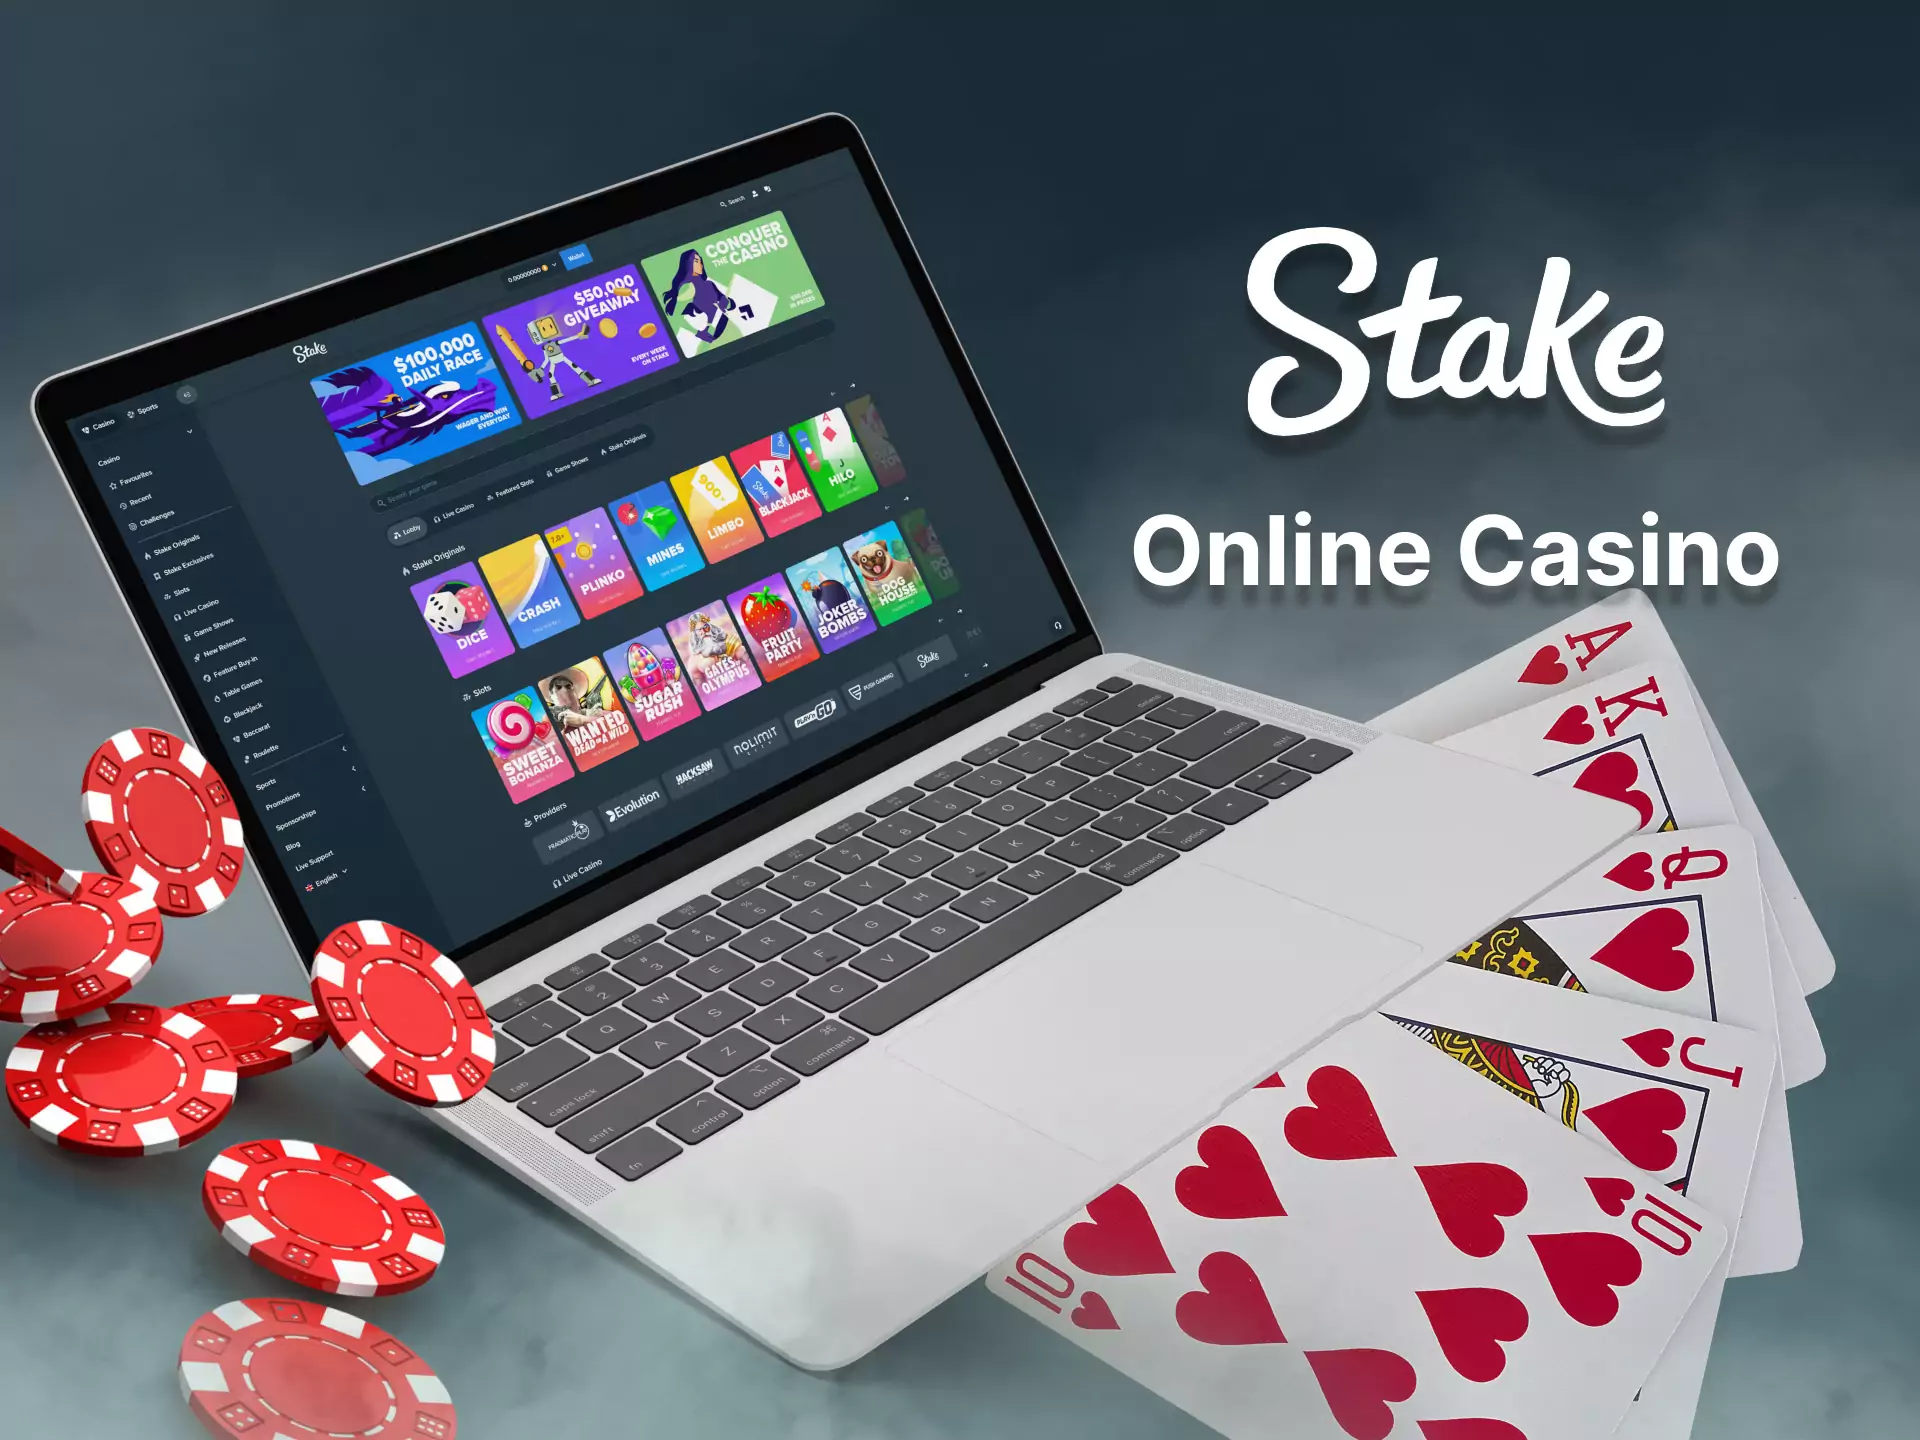 Besides sports betting, on Stake, you can play online casino games.